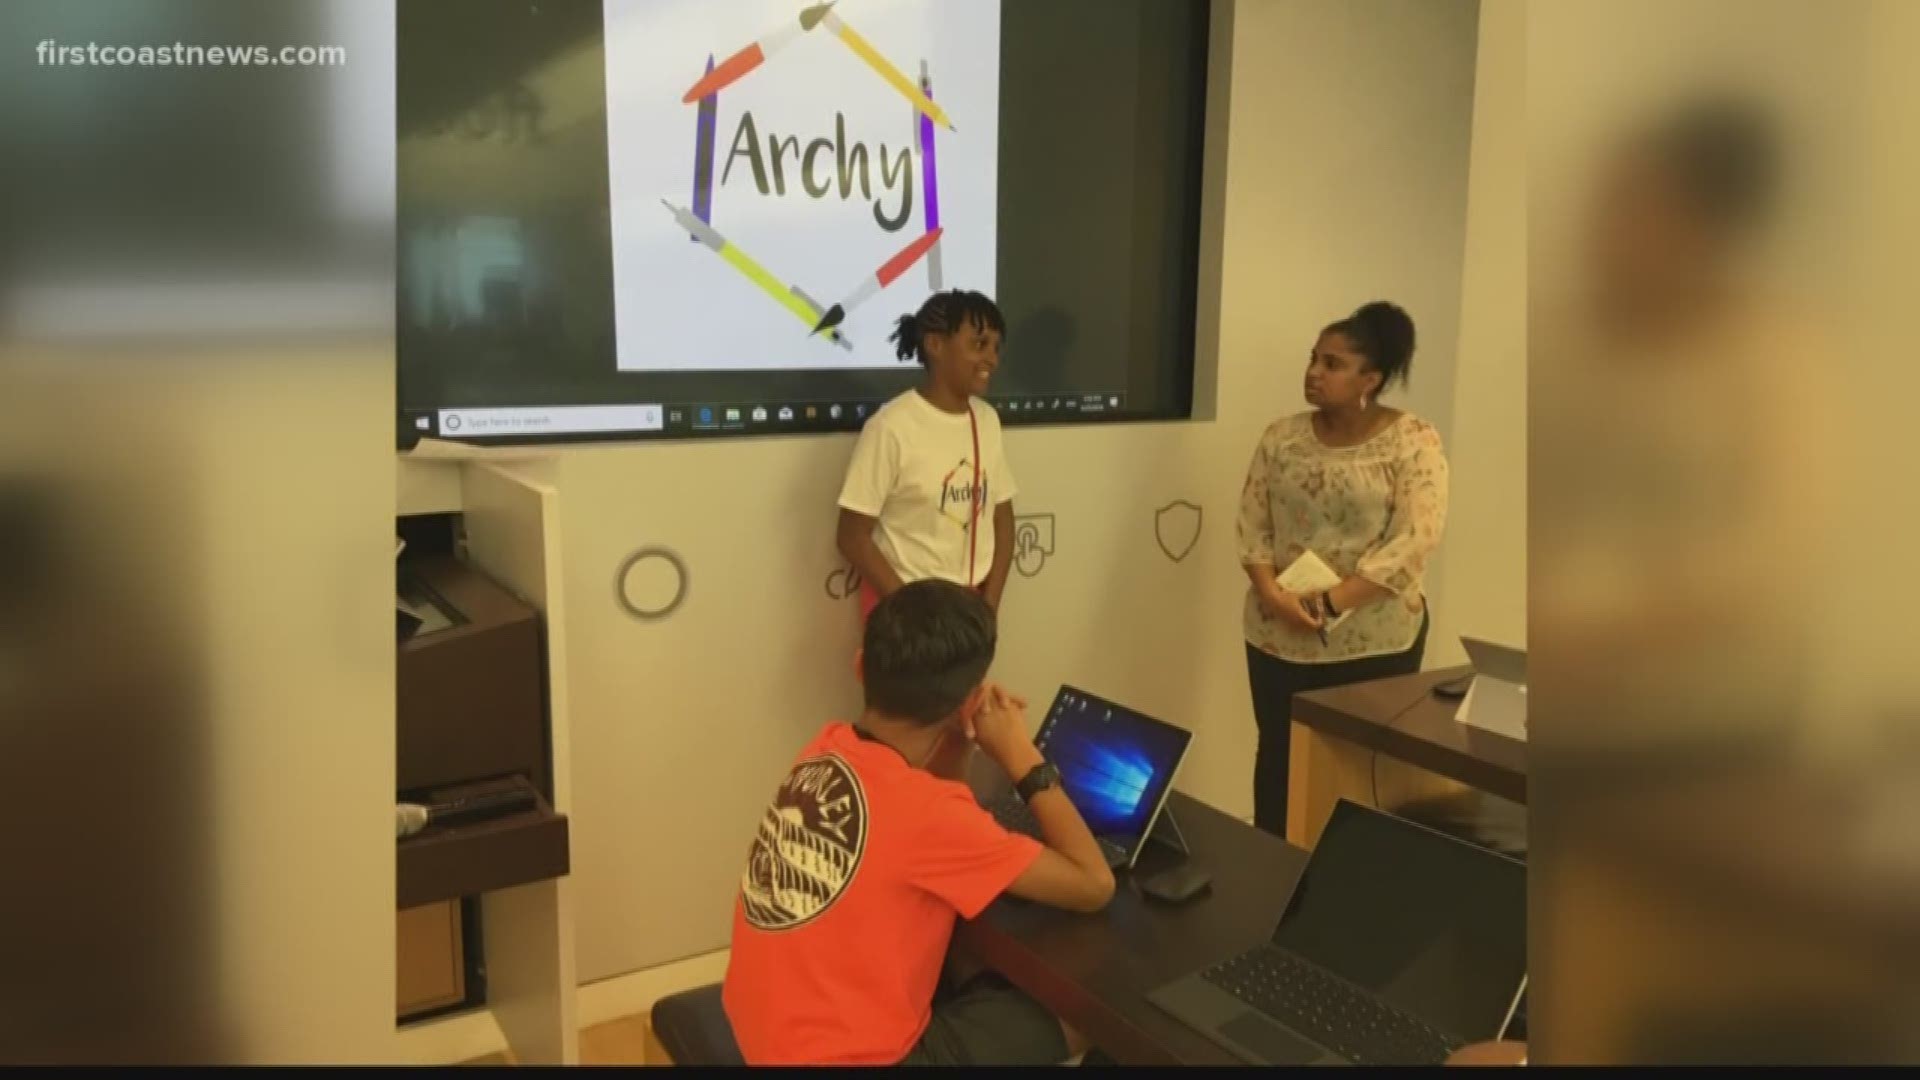 Gabriella launched "Archy" after she found out that not many minorities pursue architecture.